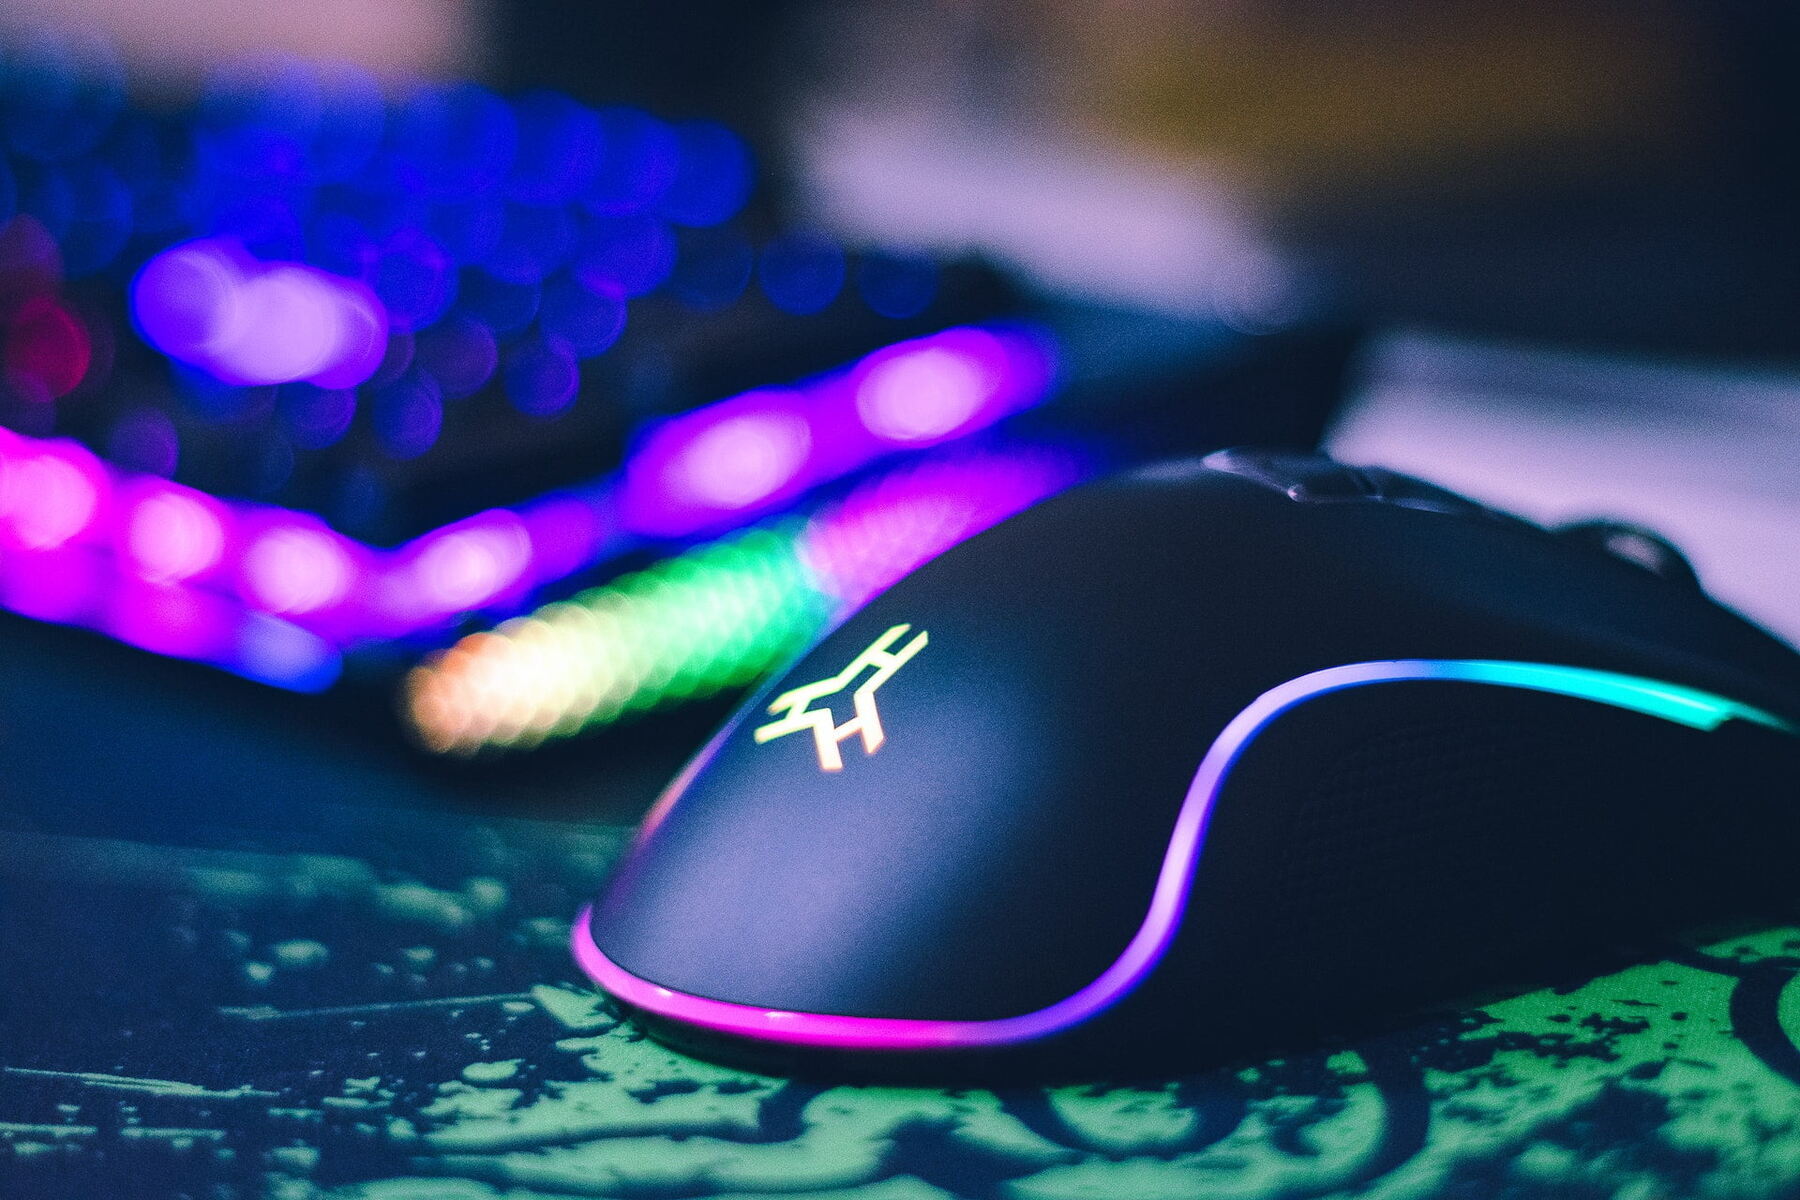 How To Use A Gaming Mouse Without Hurting Your Wrist